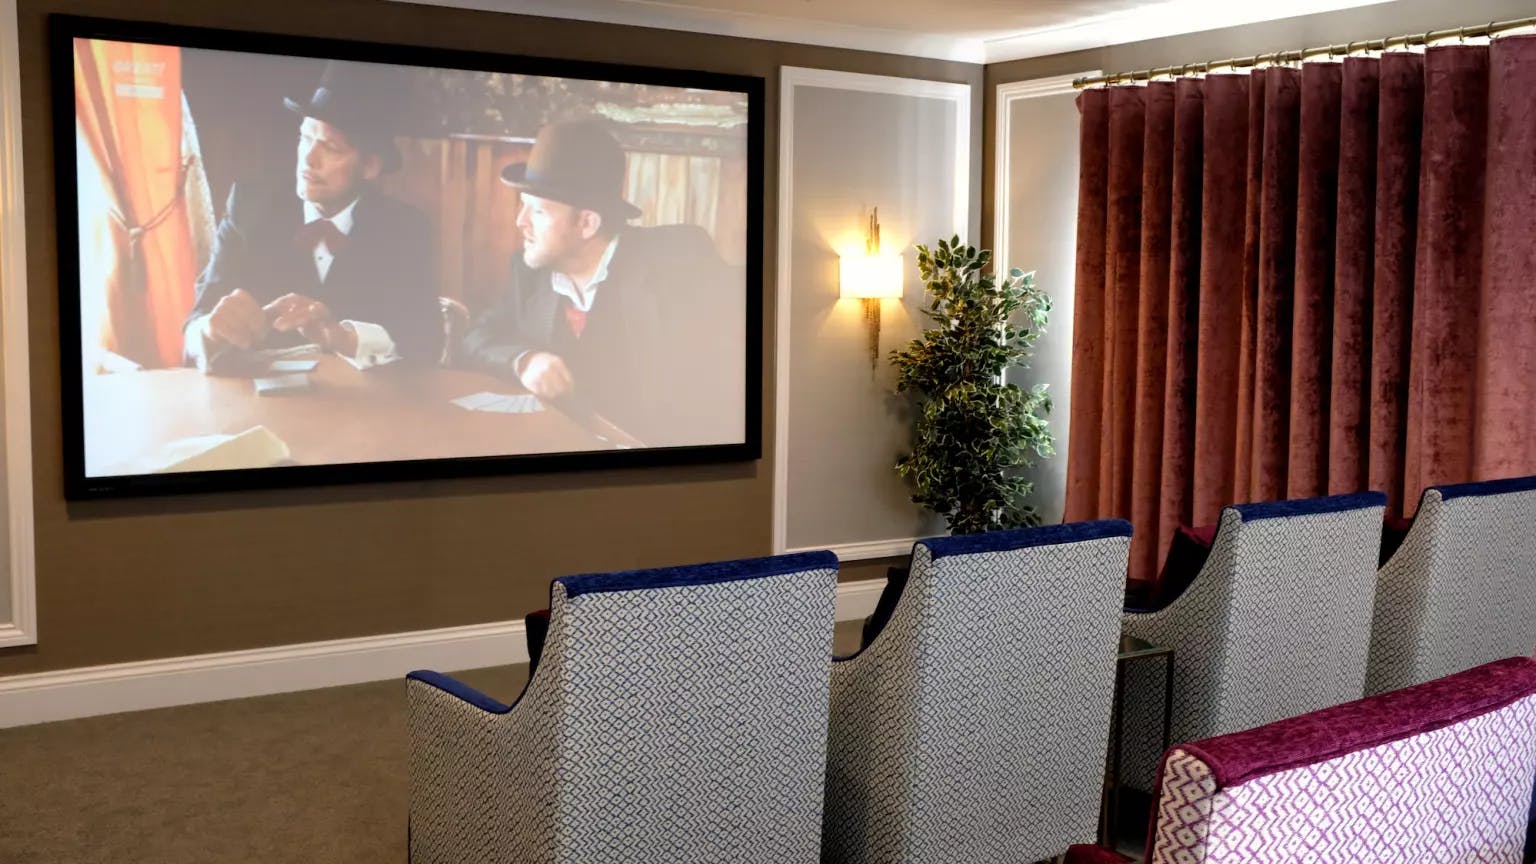 Cinema of Mantels Court care home in Biggleswade, Bedfordshire